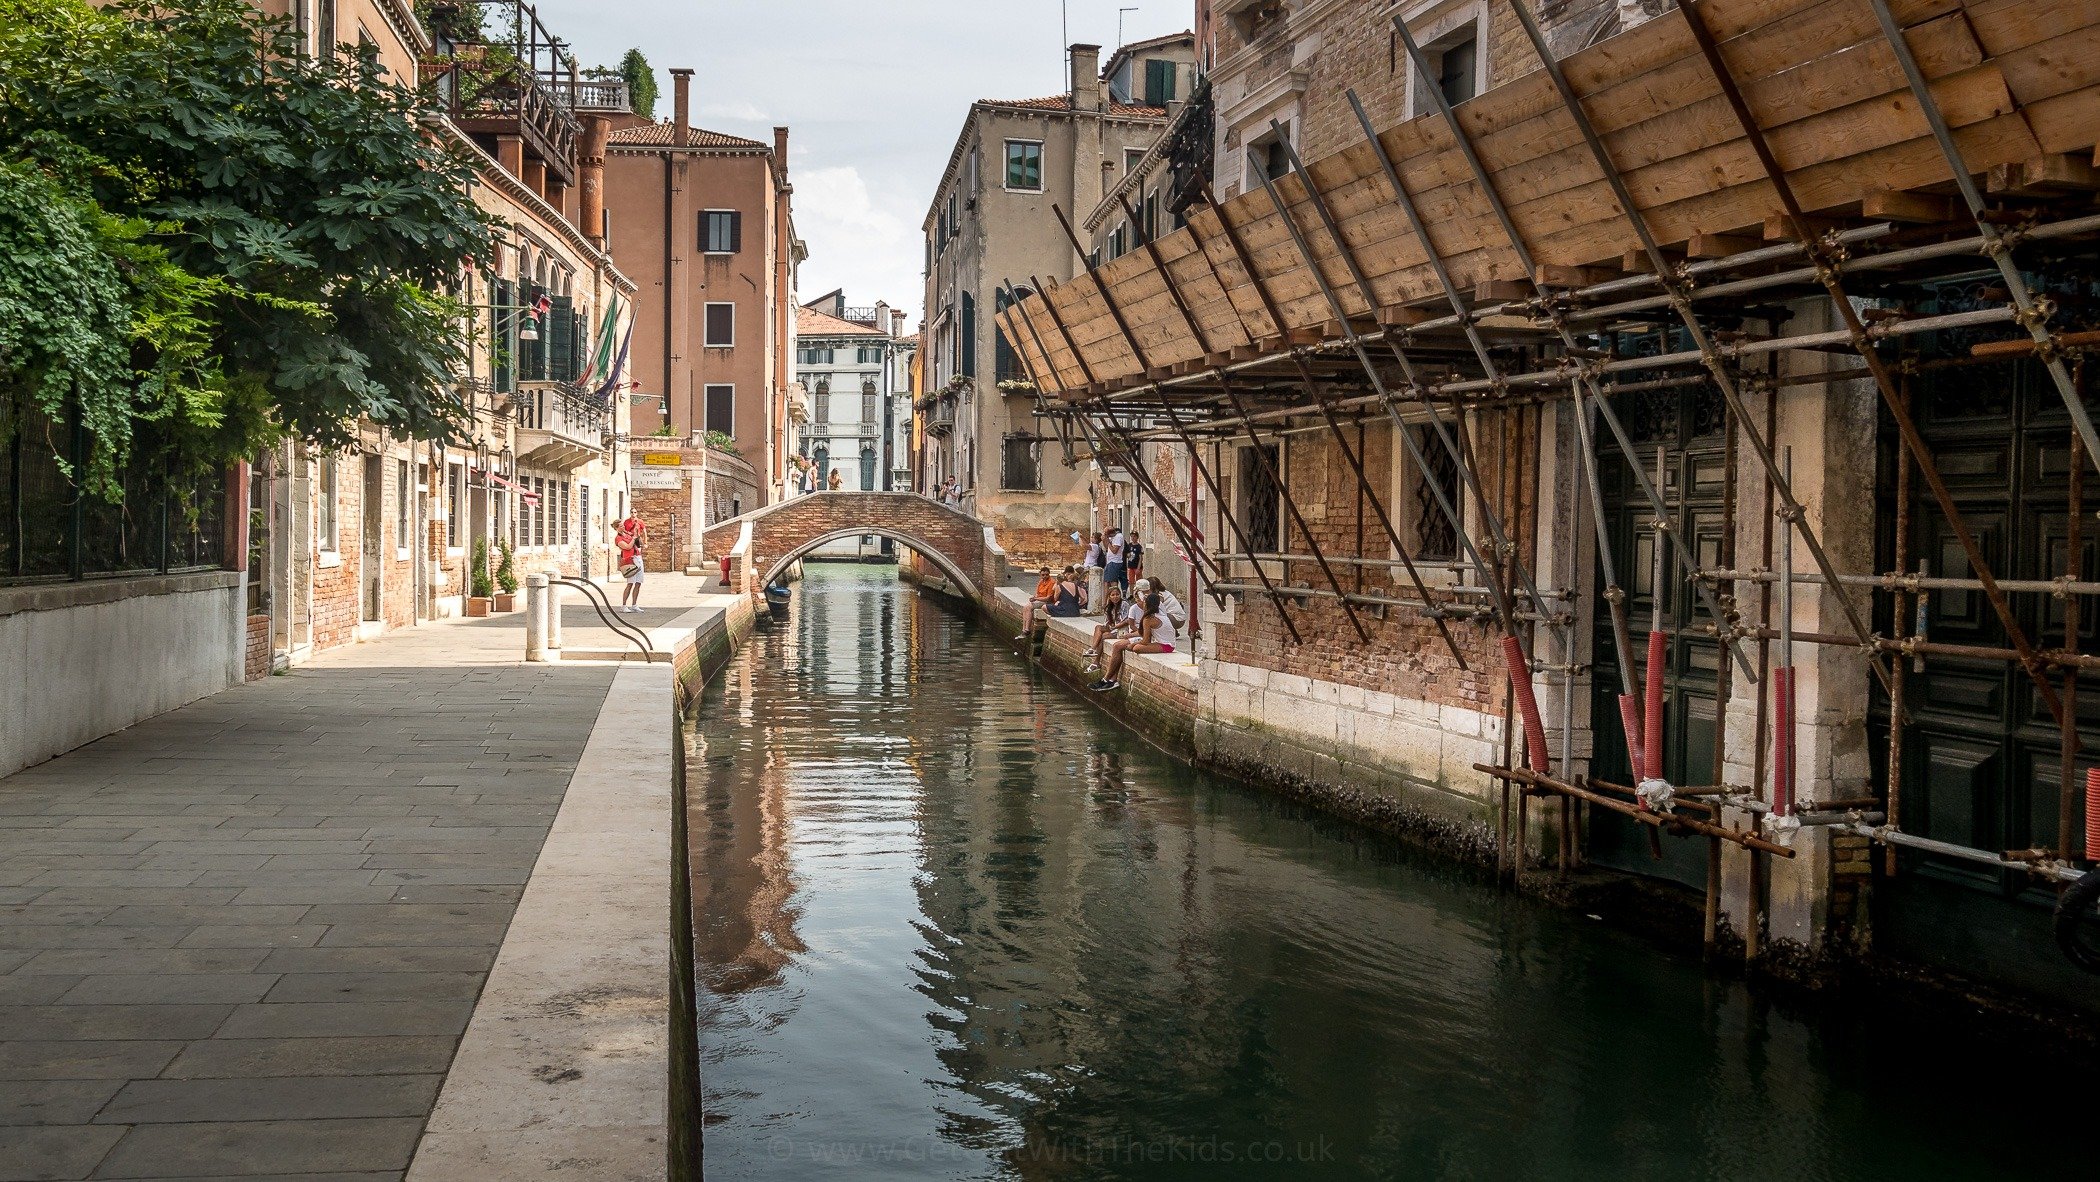 Finding a quieter spot as Venice is very busy